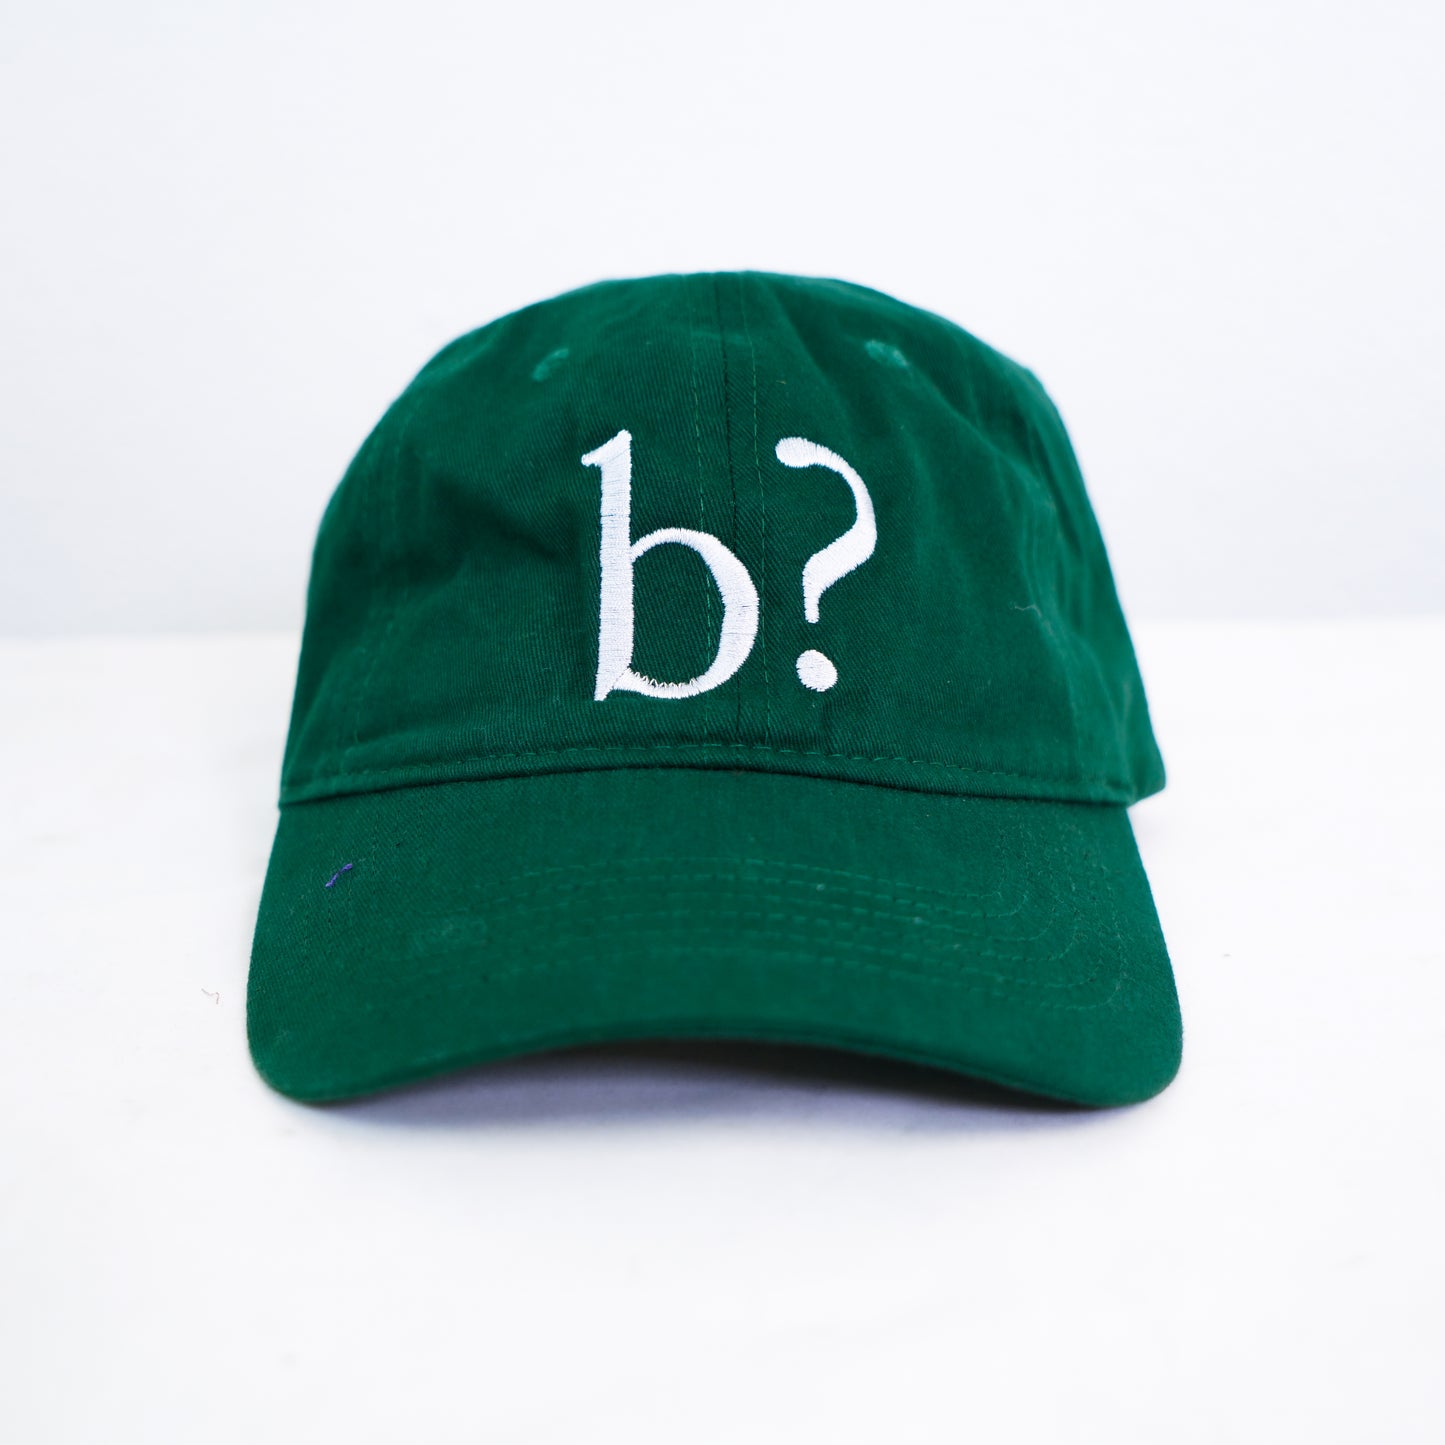 Forest Green Unstructured b? Dad Hat in White Embroidery by HOAX